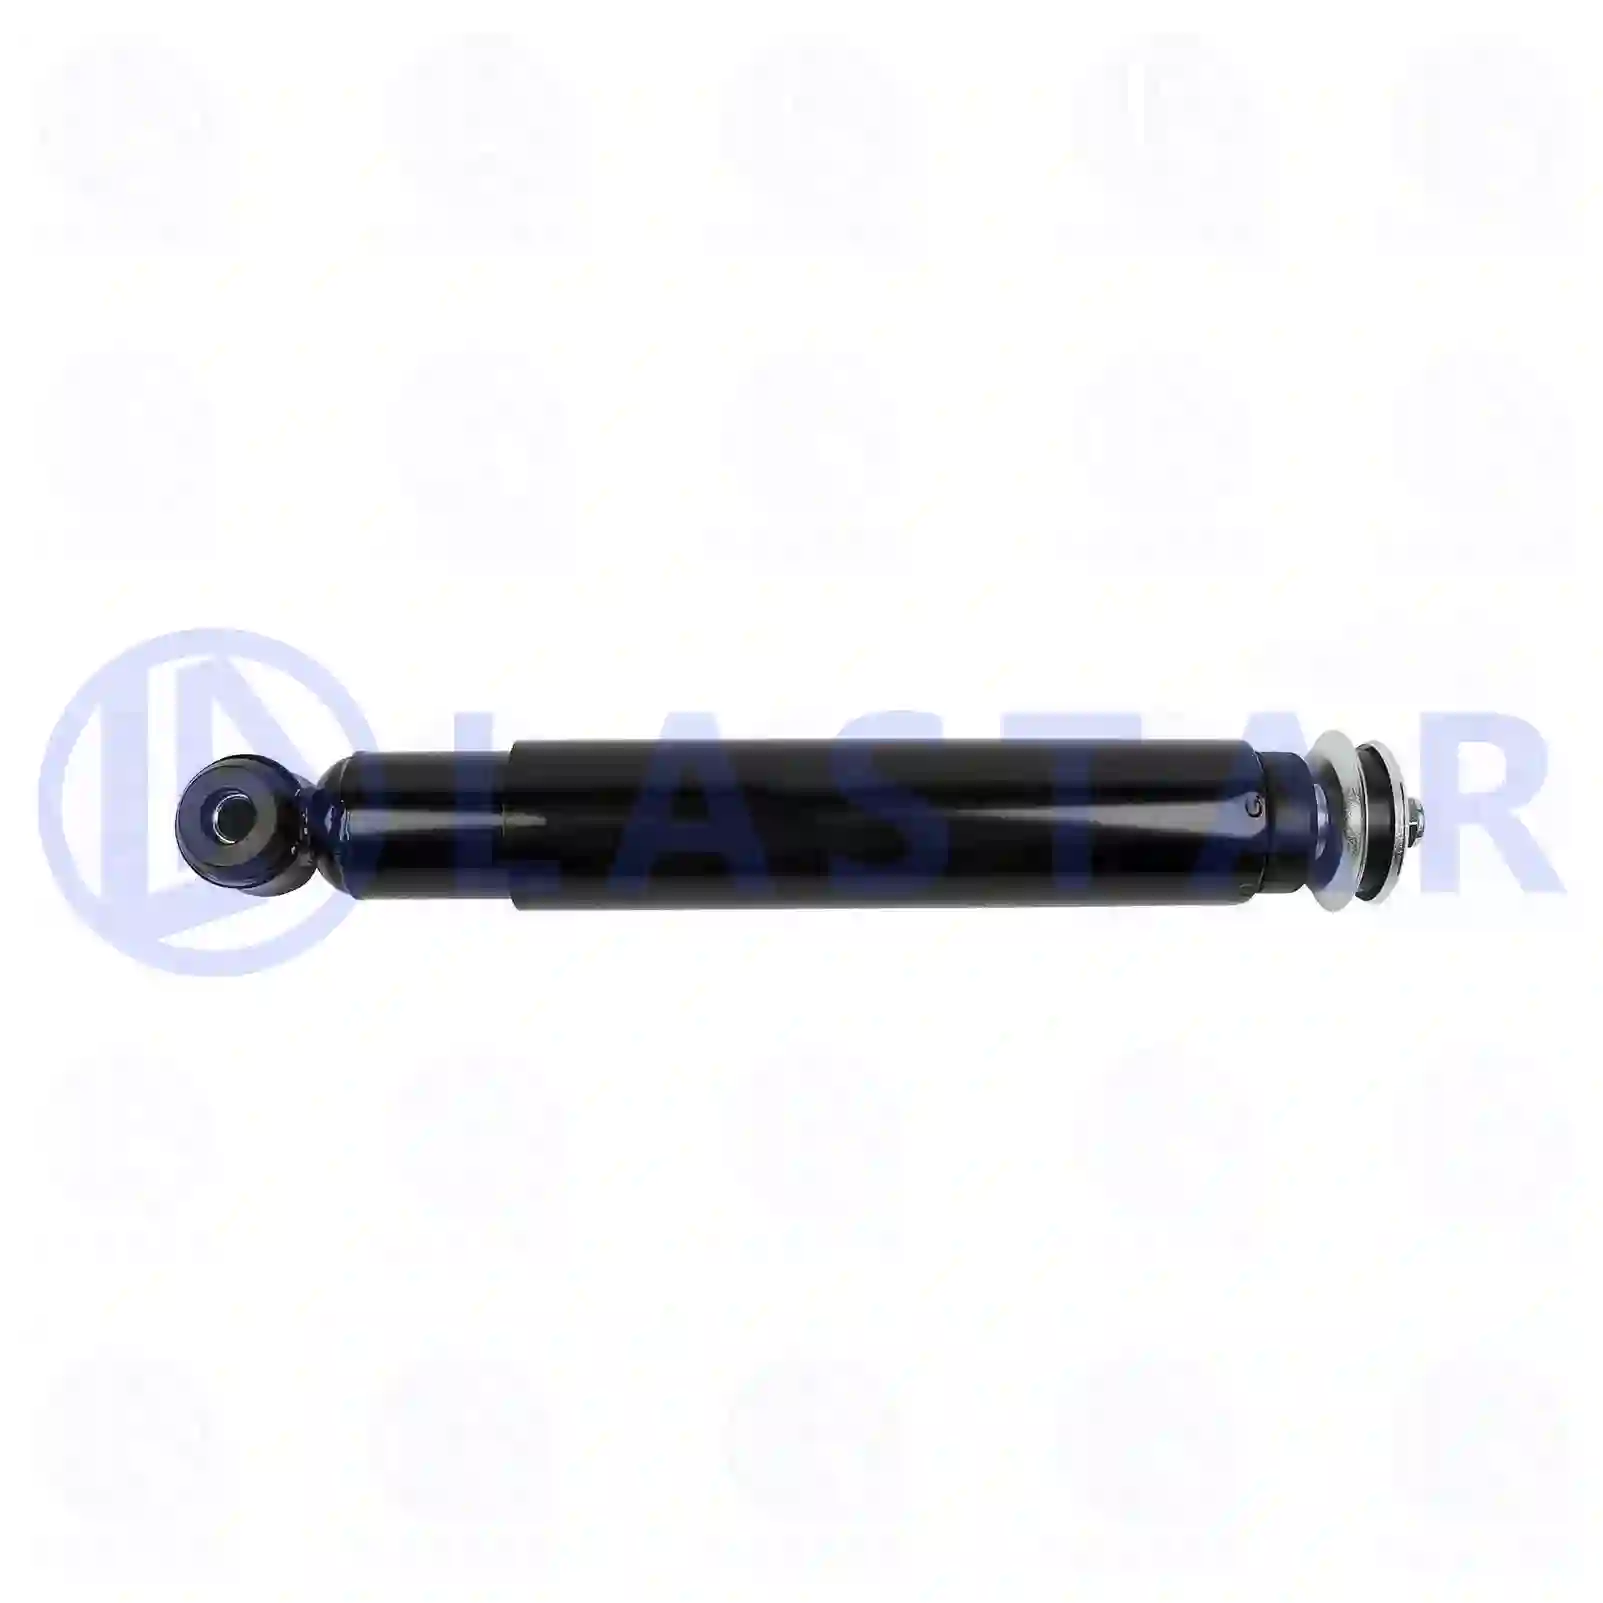 Shock absorber, 77730130, 1438542, , , , , , ||  77730130 Lastar Spare Part | Truck Spare Parts, Auotomotive Spare Parts Shock absorber, 77730130, 1438542, , , , , , ||  77730130 Lastar Spare Part | Truck Spare Parts, Auotomotive Spare Parts